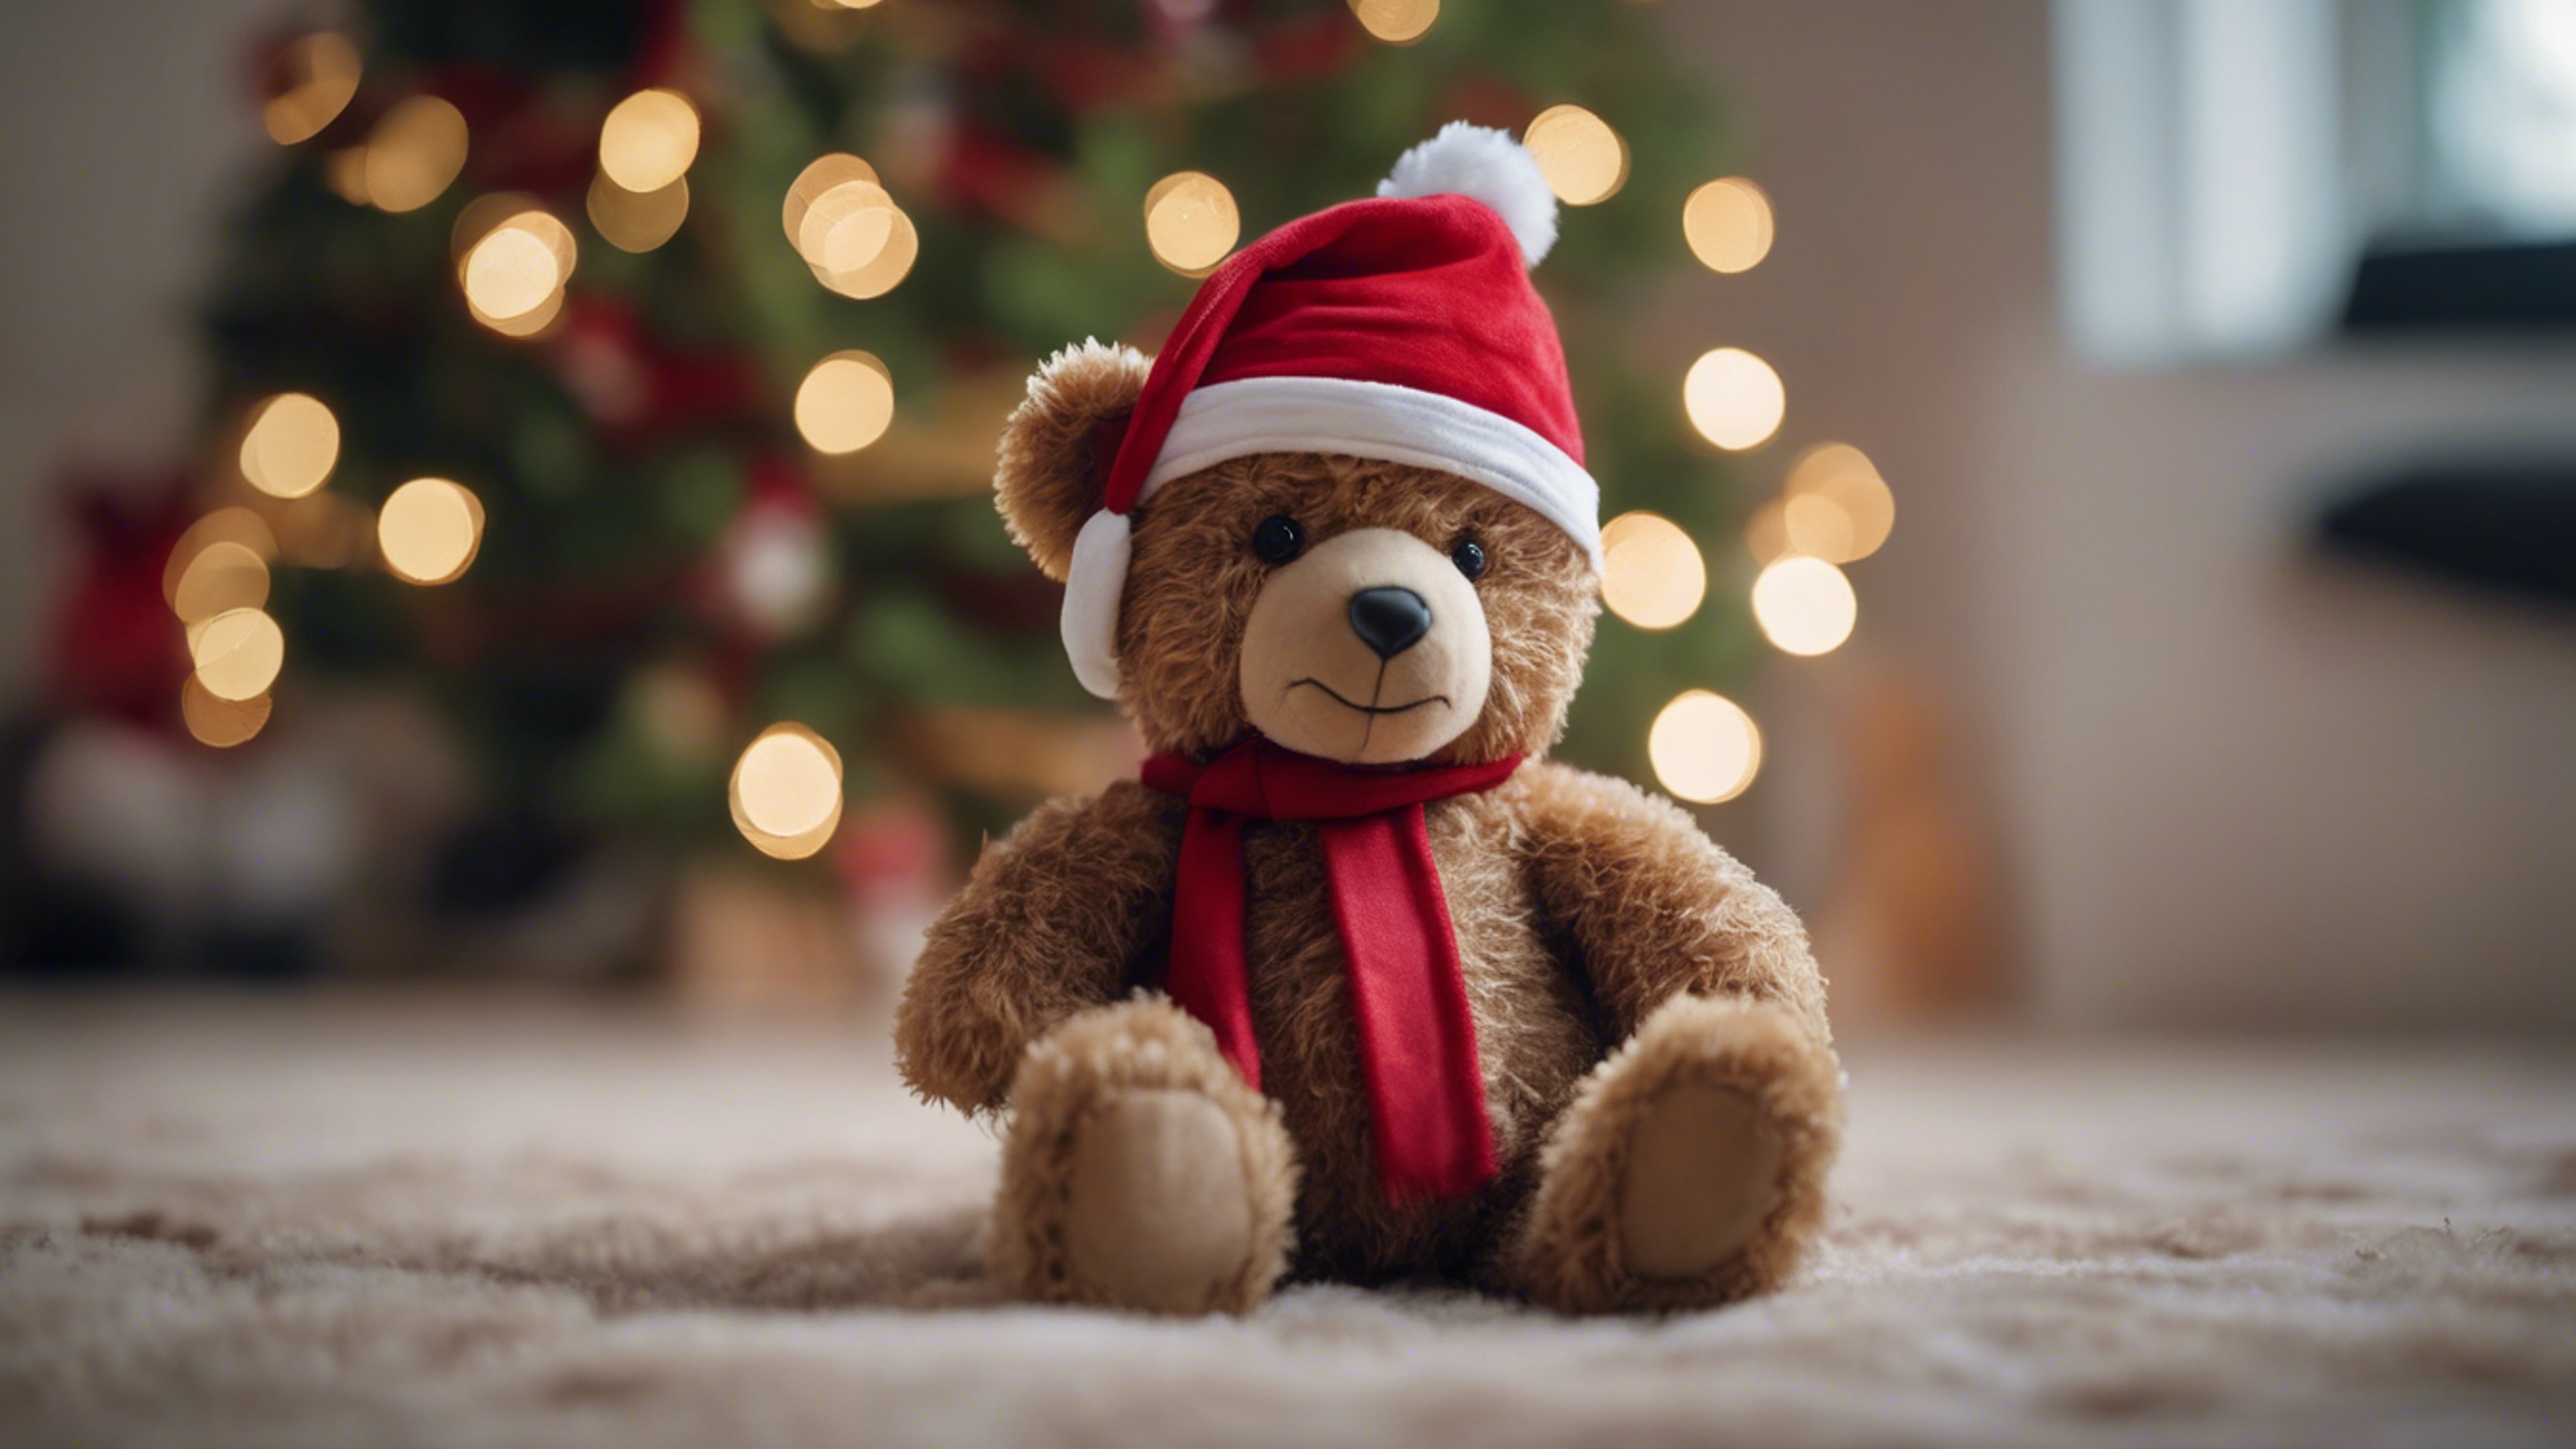 A teddy bear wearing a red Christmas hat, sitting next to a Christmas tree. Wallpaper[764052ee6d604b67a698]